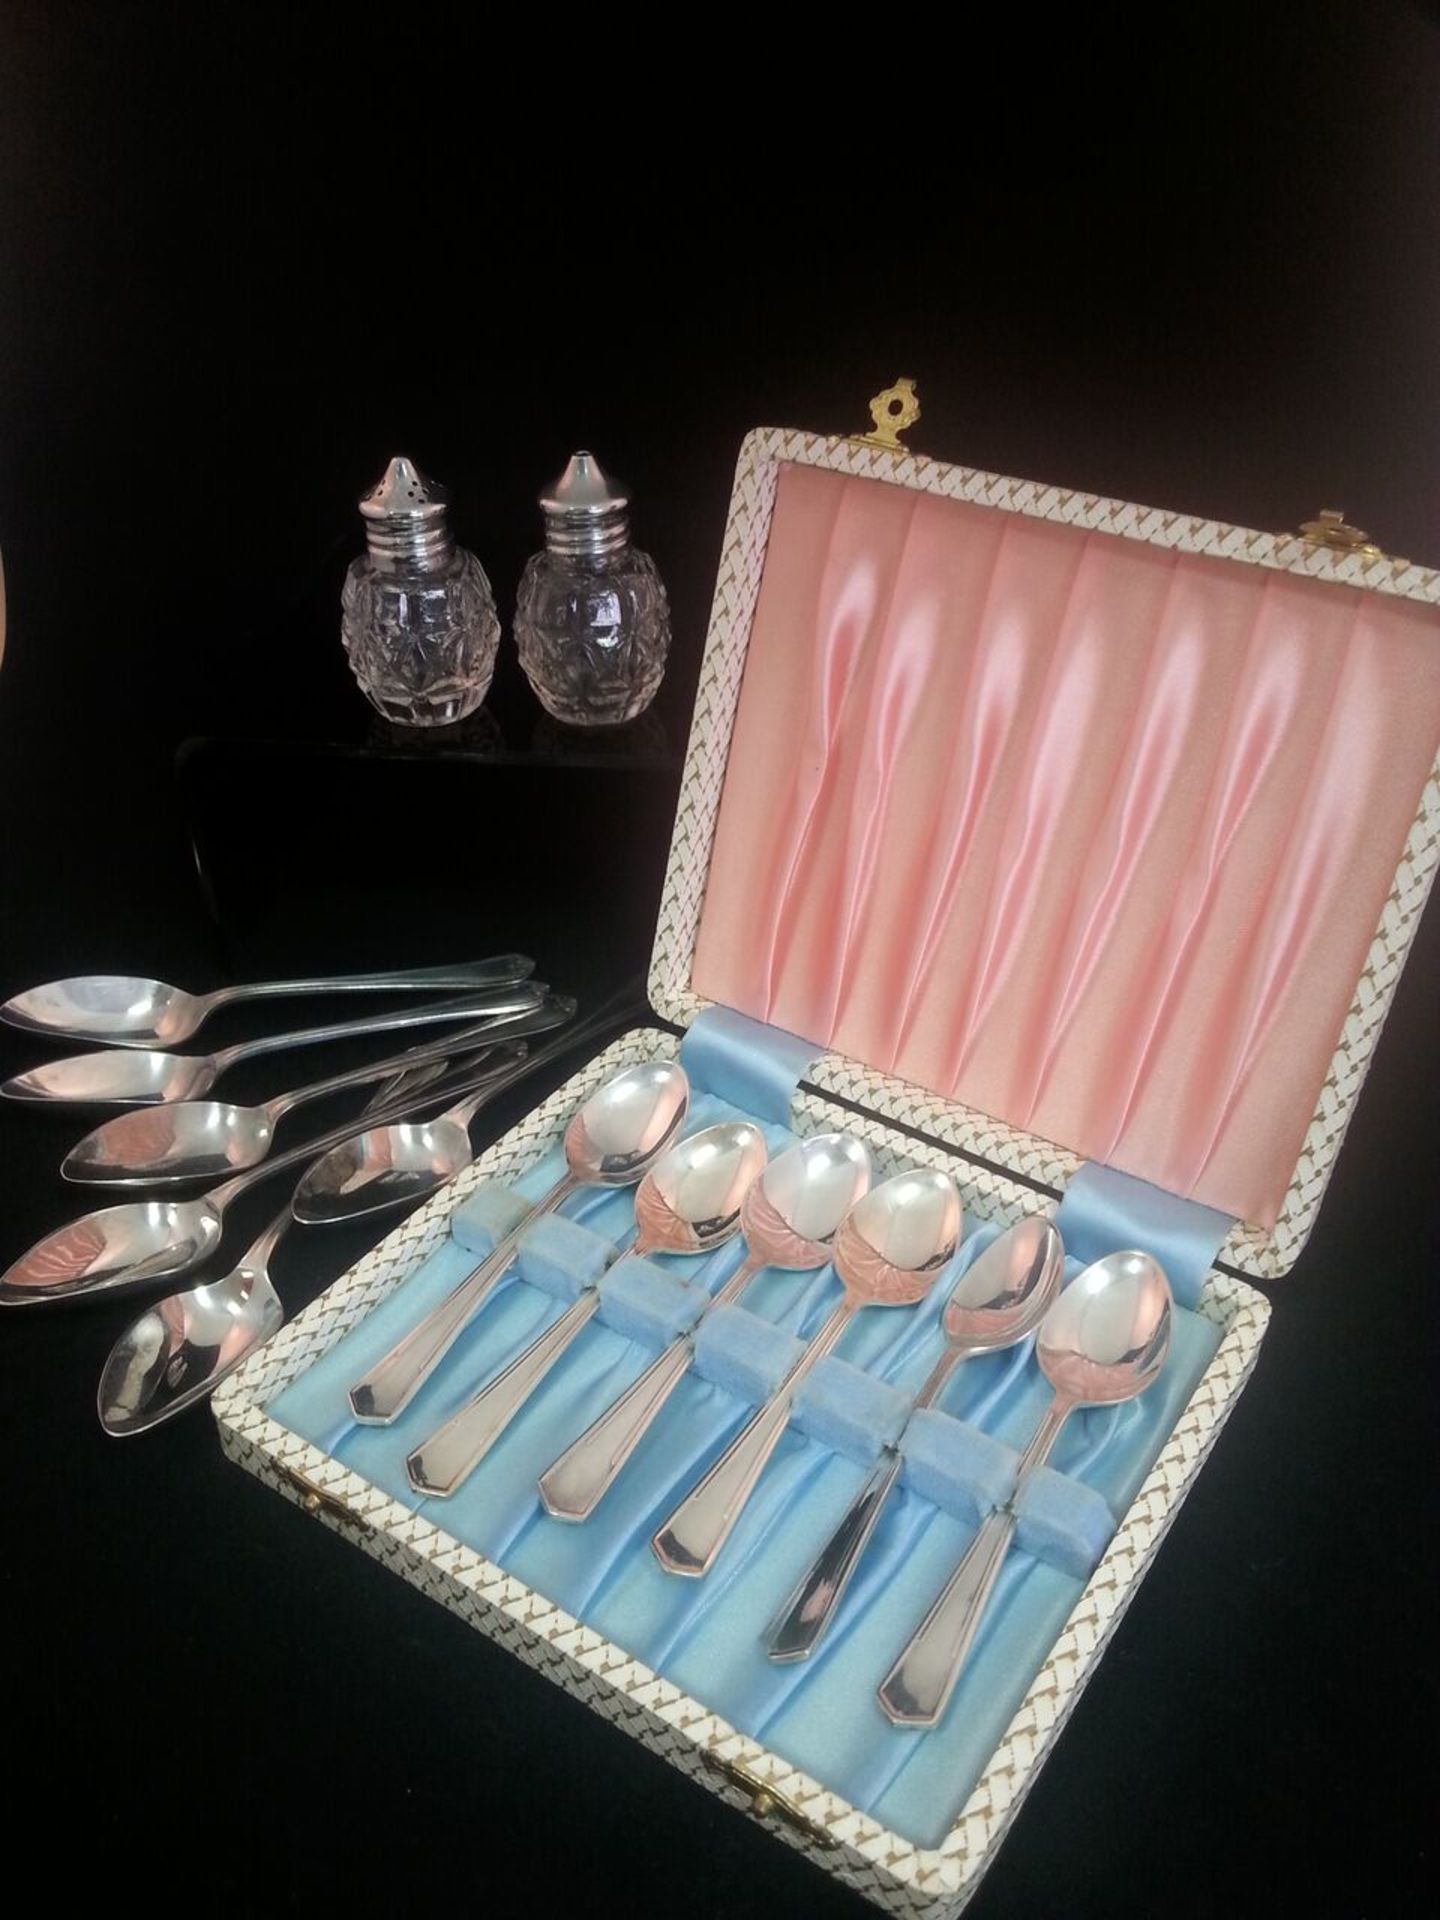 GROUP OF SILVER PLATE TABLEWARE CUTLERY ETC Low cost delivery available on all items. This is a